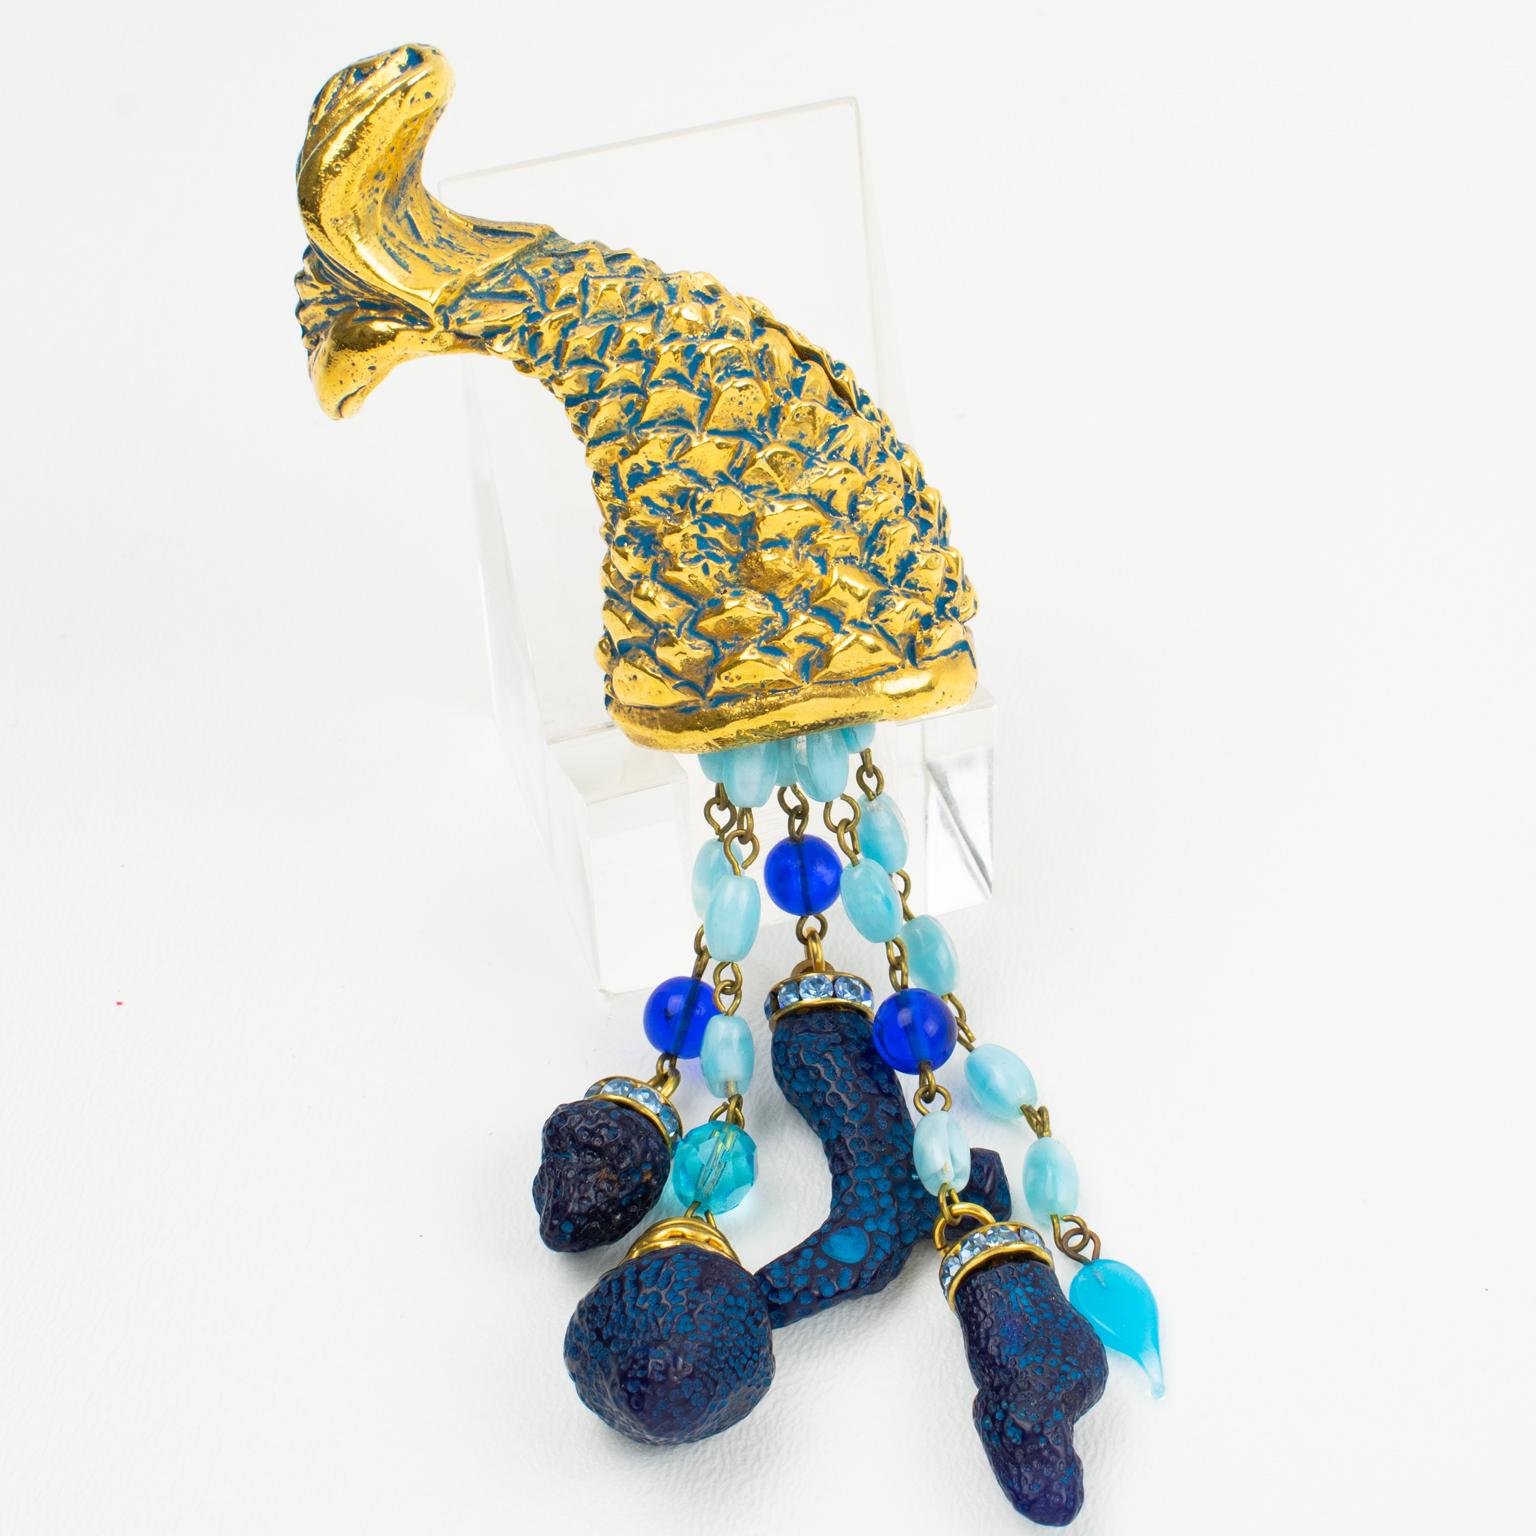 Kalinger Pin Brooch Gilt Resin Horn of Plenty with Blue Jeweled Charms In Excellent Condition For Sale In Atlanta, GA